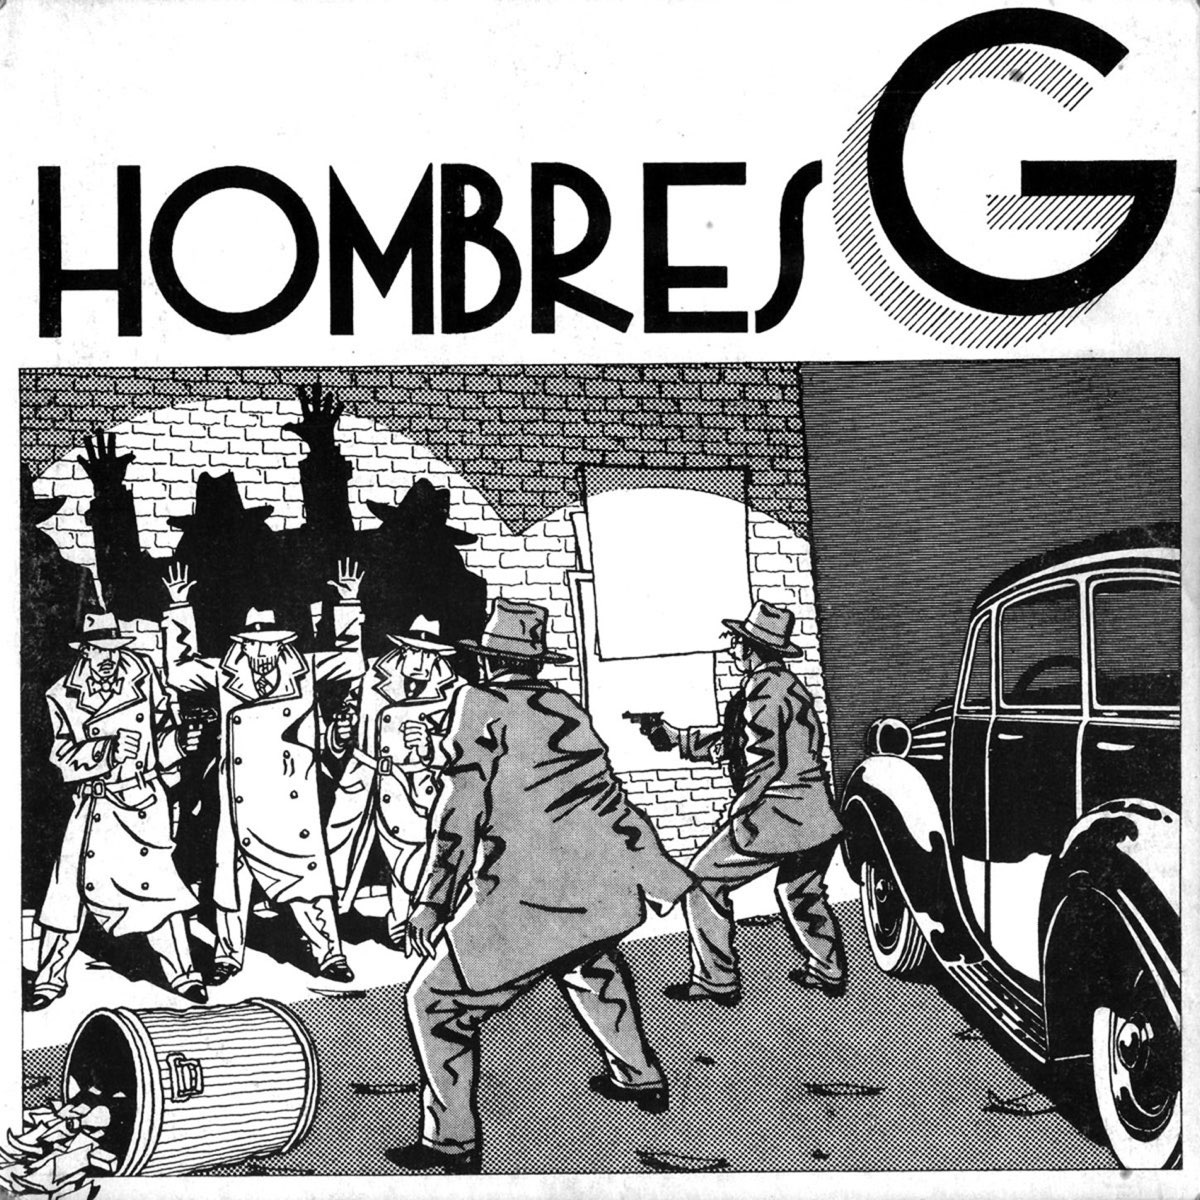 ‎Hombres G by Hombres G on Apple Music